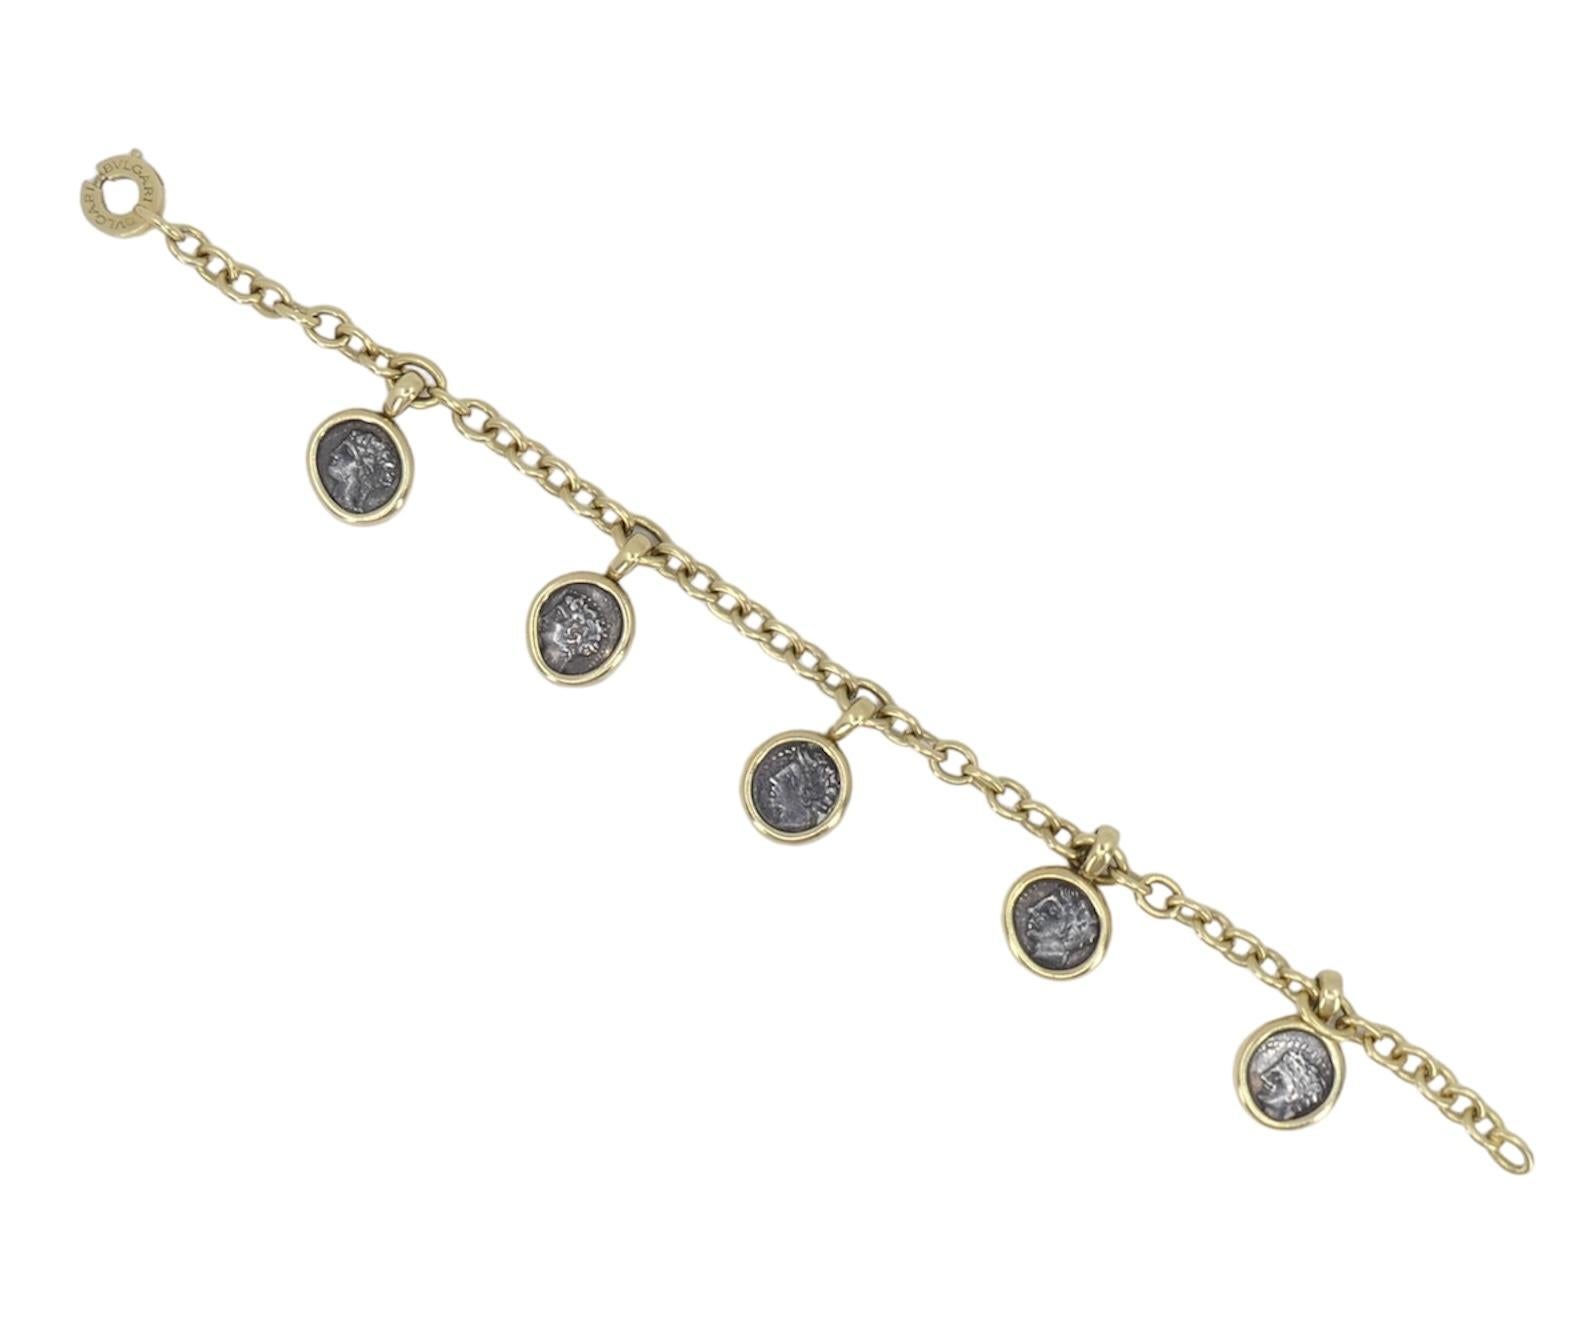 This Bvlgari Monete Ancient Coin Charm Bracelet is a captivating blend of history and elegance. Crafted from 18k yellow gold, it features five ancient coin charms that dangle gracefully from the bracelet, each telling a story of antiquity. Weighing